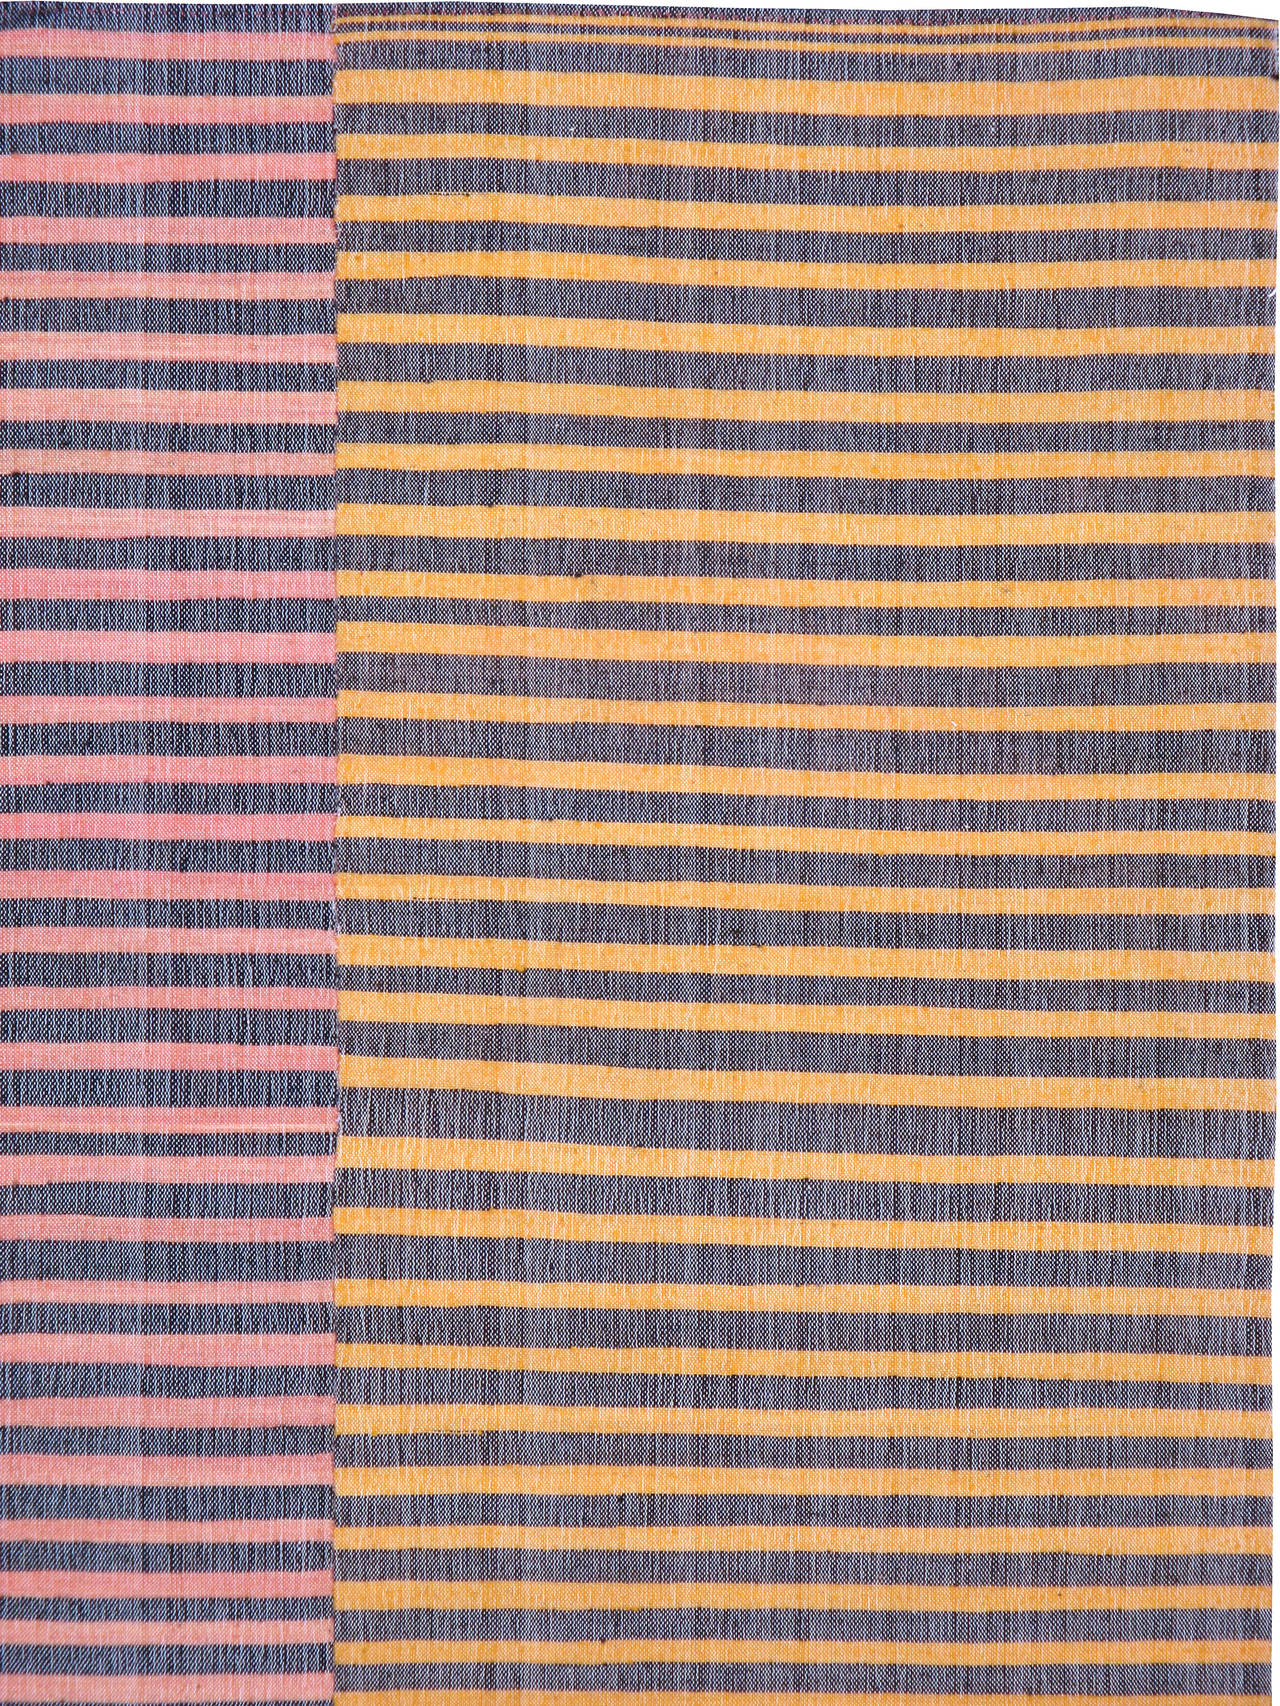 A vintage Turkish flat-woven textile rug from the second quarter of the 20th century.